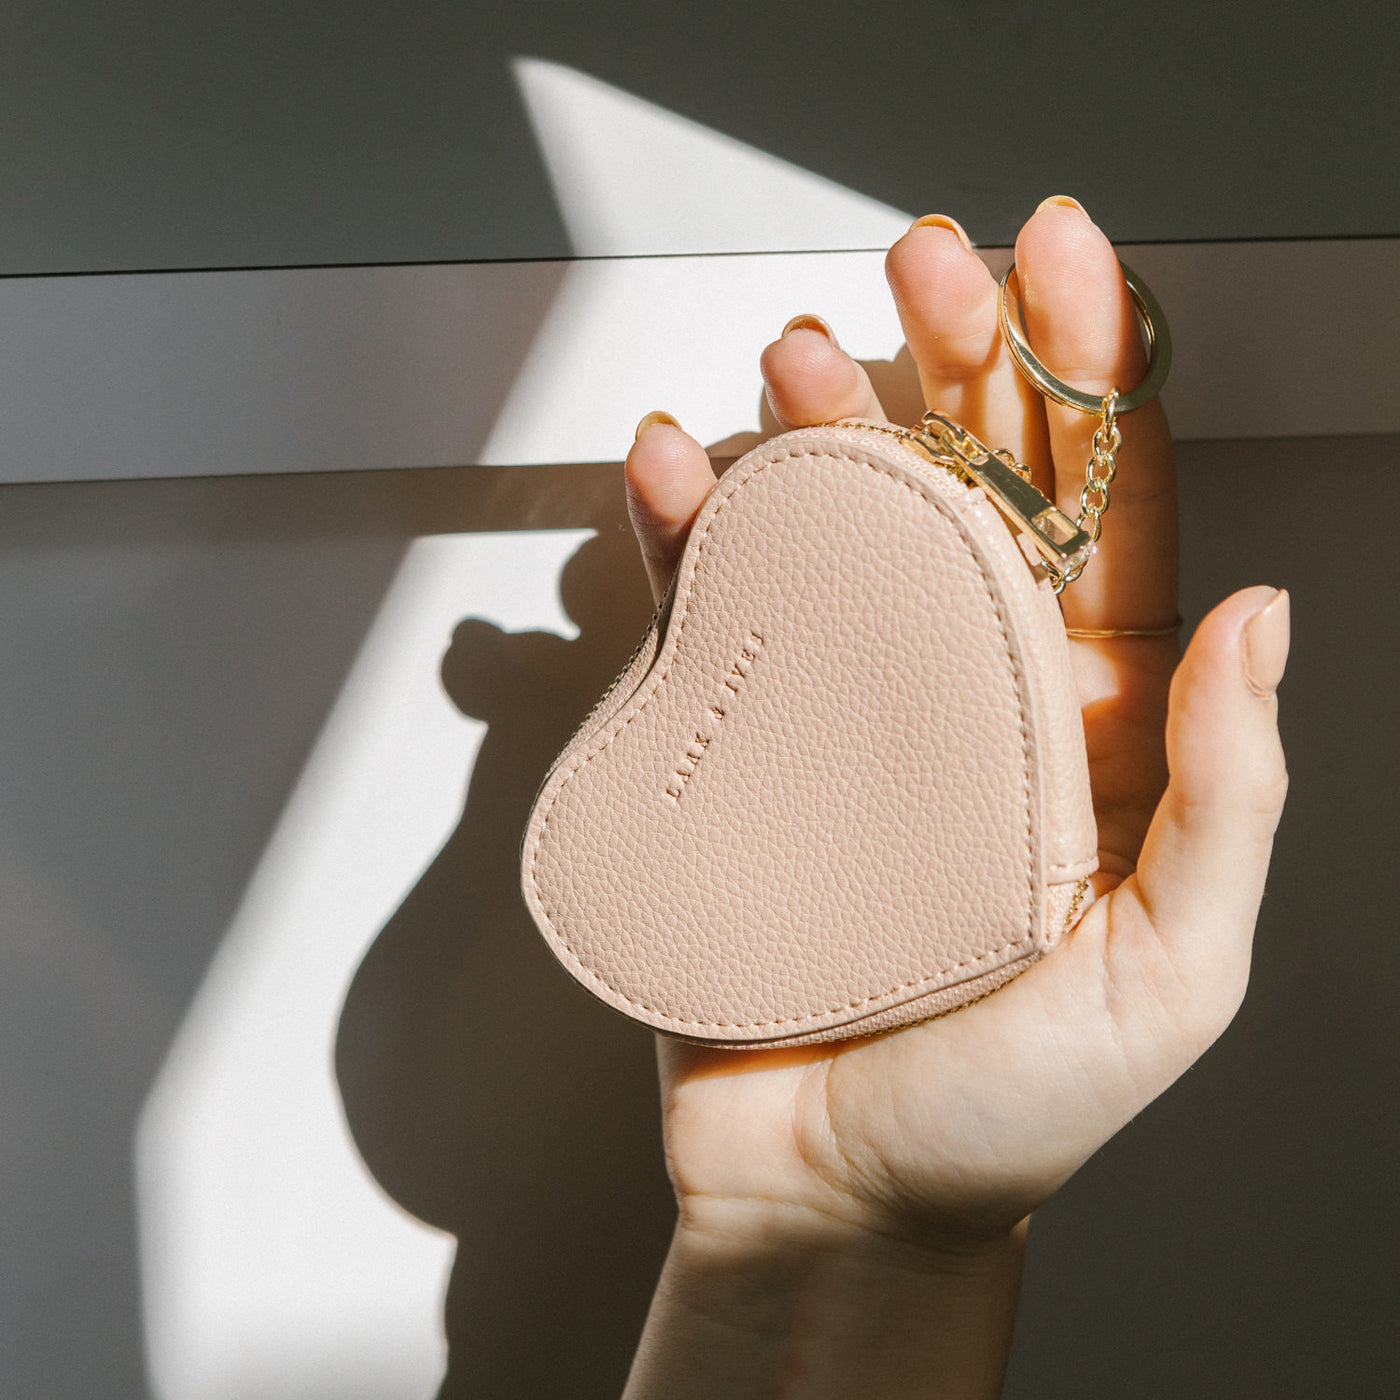 Lark and Ives / Vegan Leather Accessories / Small Accessories / Coin Purse / Heart shaped / Coin Pouch / Mini Wallet / Gift Guide / Gift Ideas / Bridesmaid Gifts / Nude Pink 